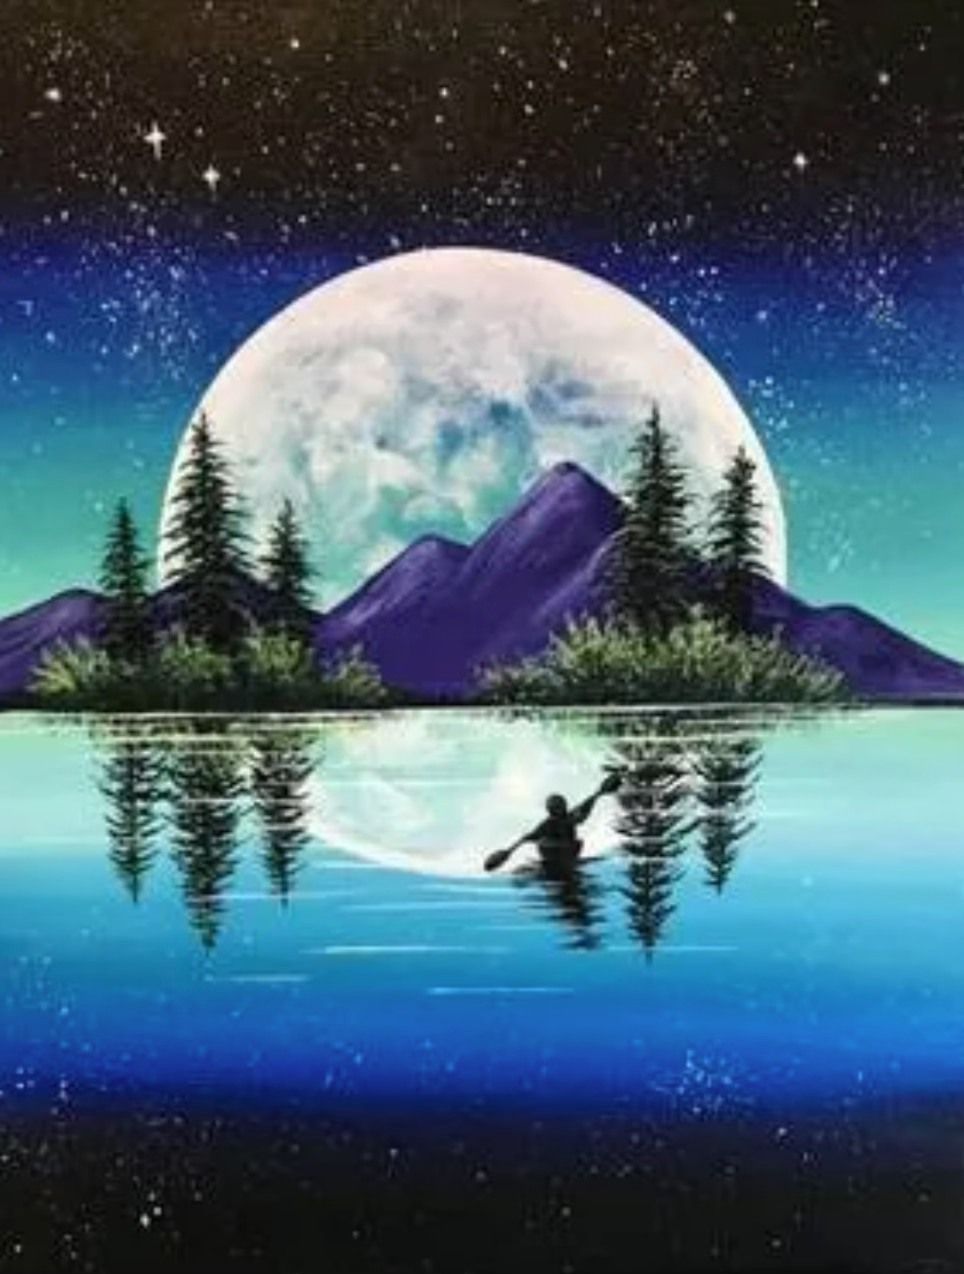 Paint Nite Event- "Moonshine Mountains" 